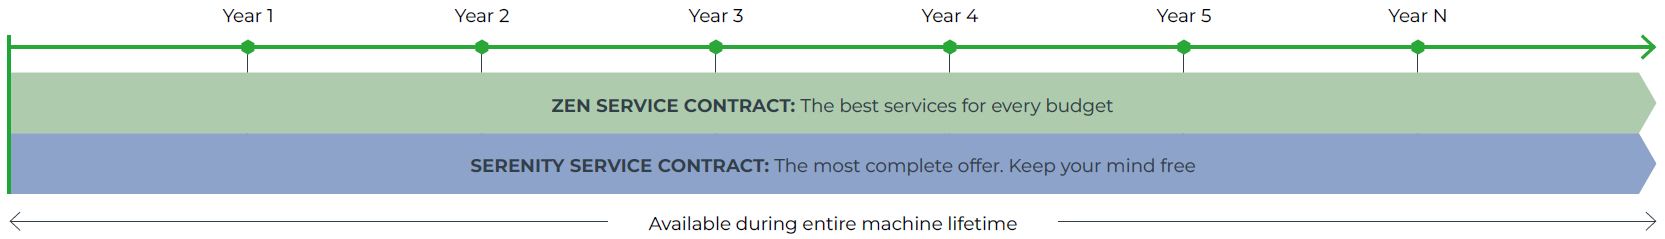 Services contracts - Timeline